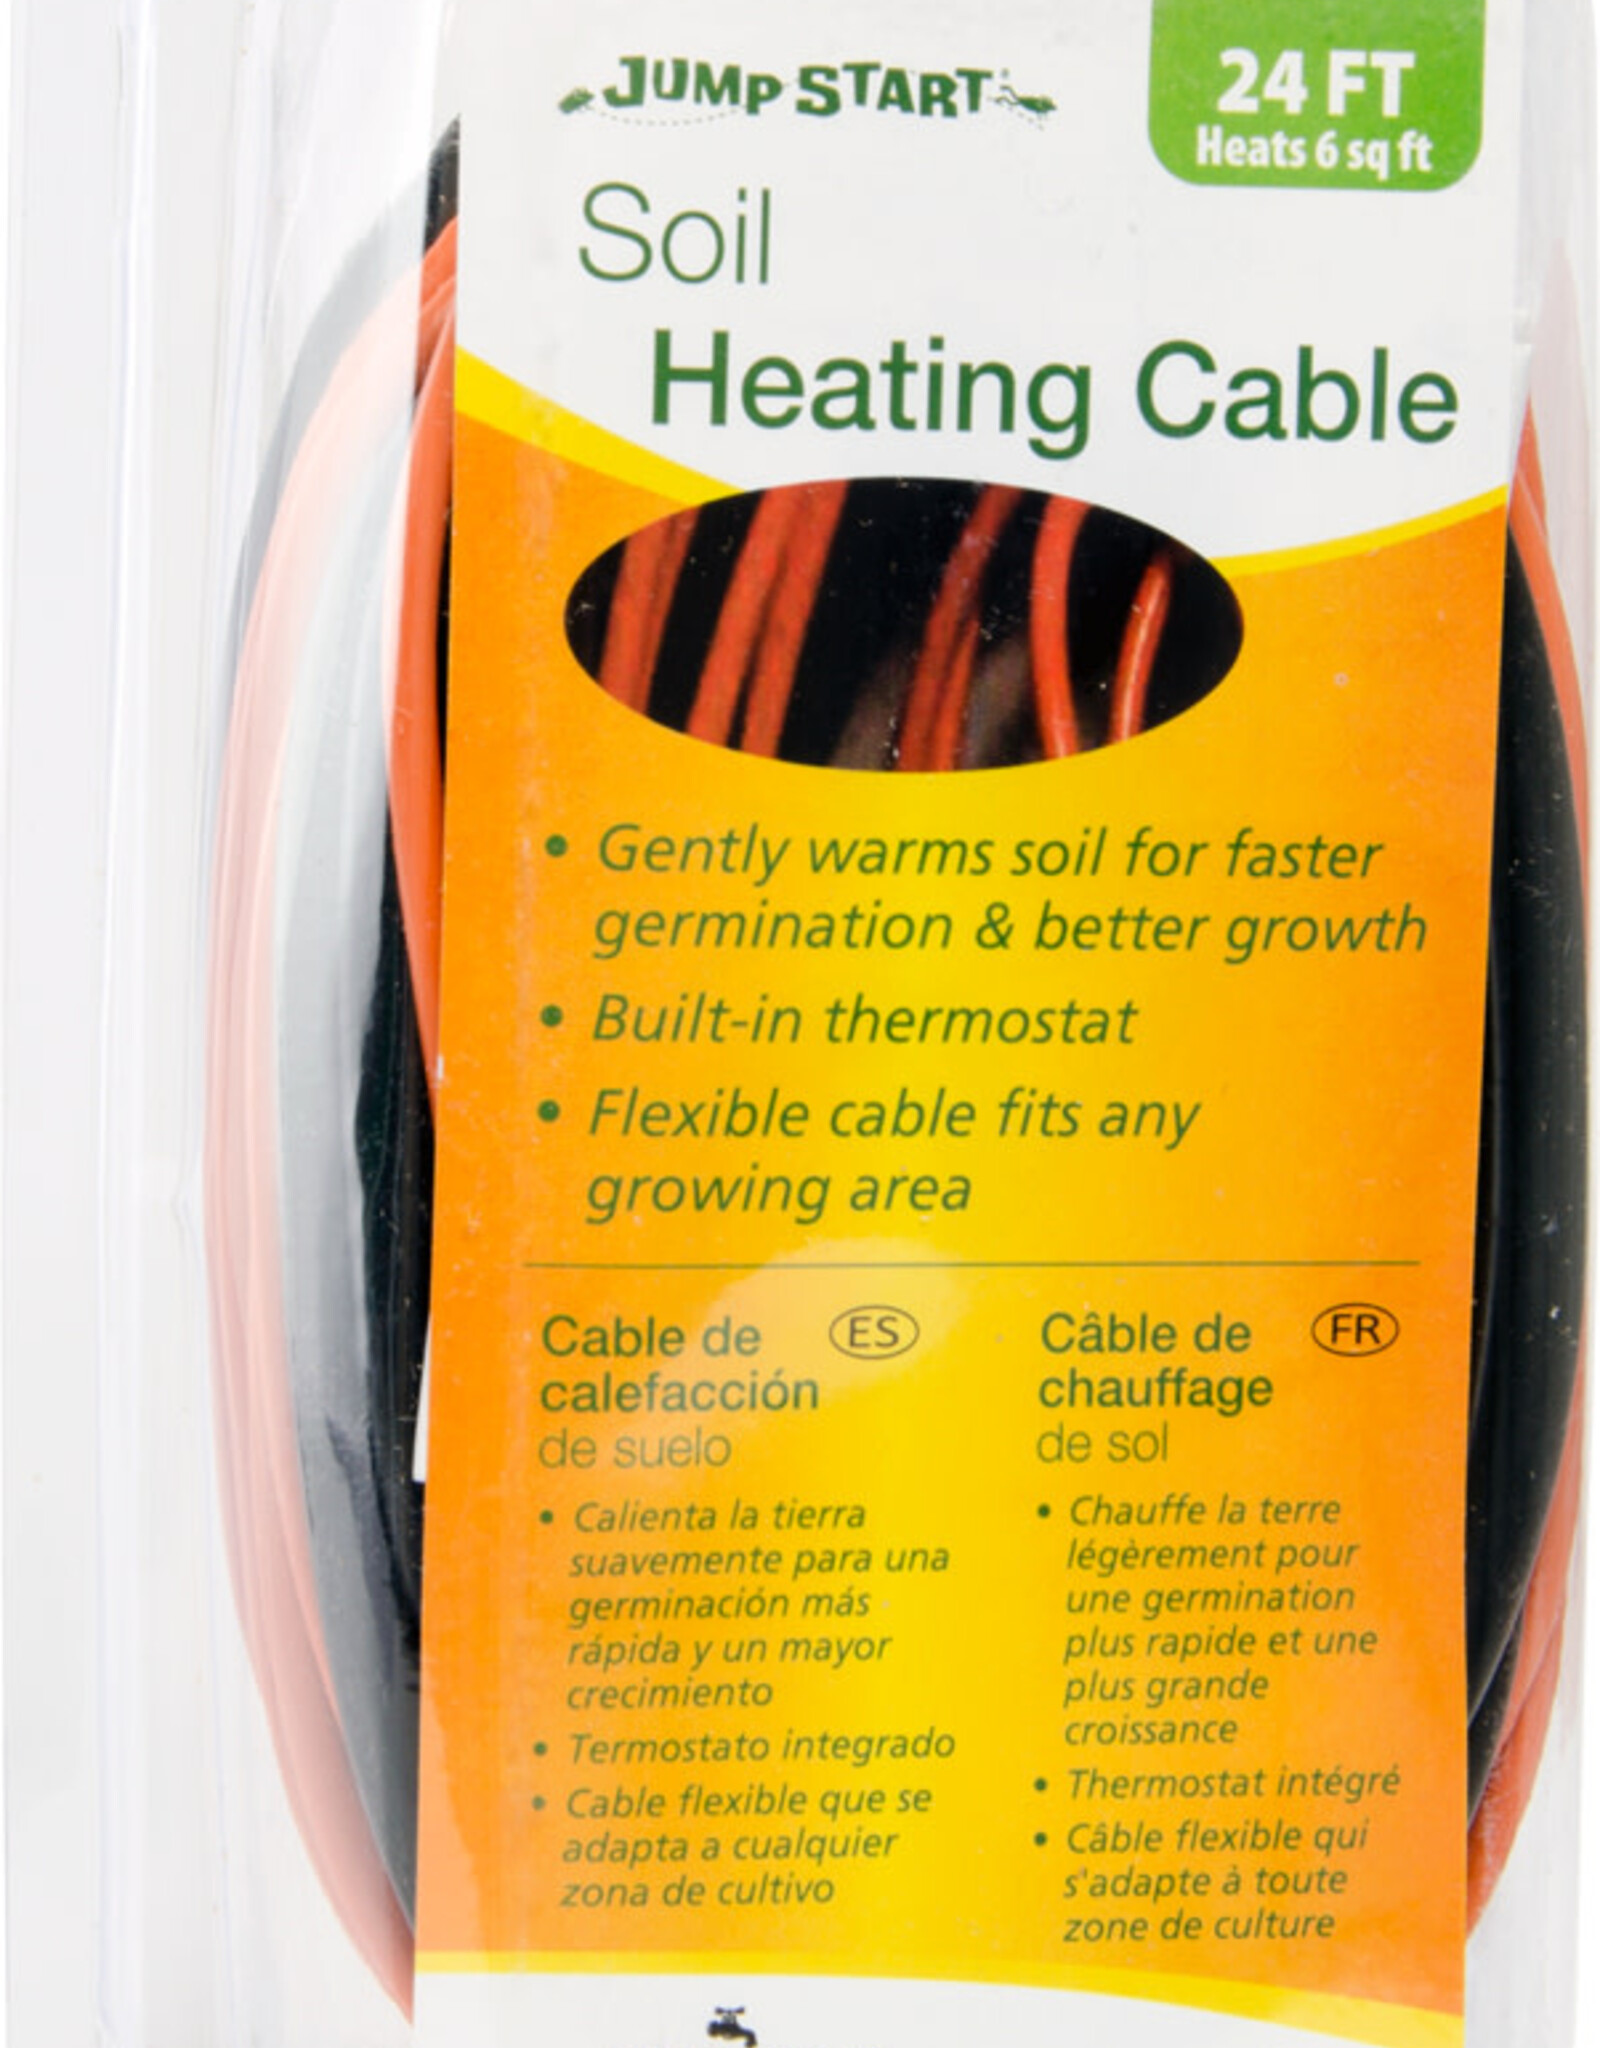 Jump Start Soil Heating Cable 24 ft